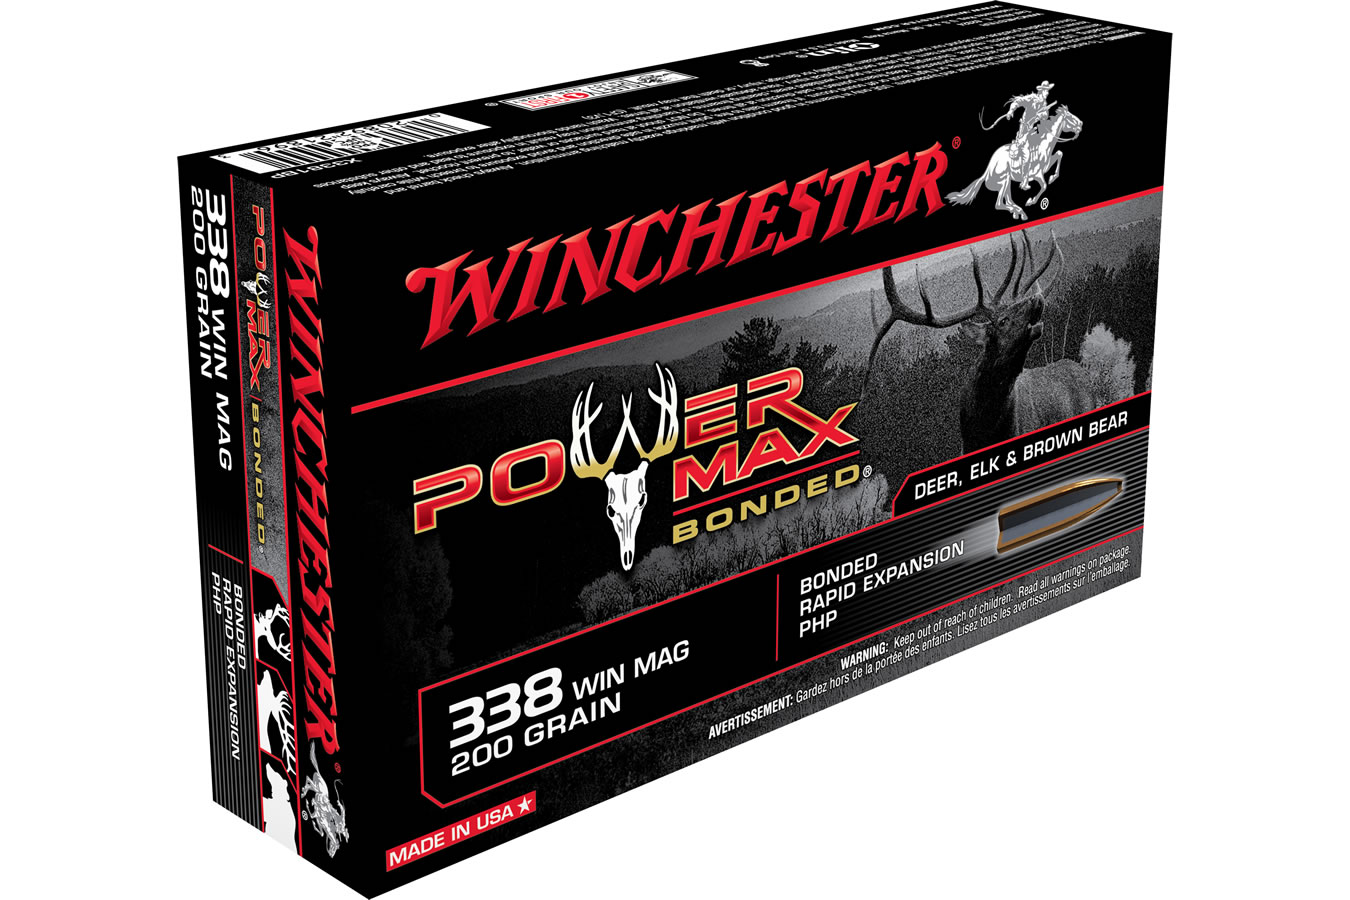 WINCHESTER AMMO 338 WIN MAG 200 GR POWER MAX BONDED